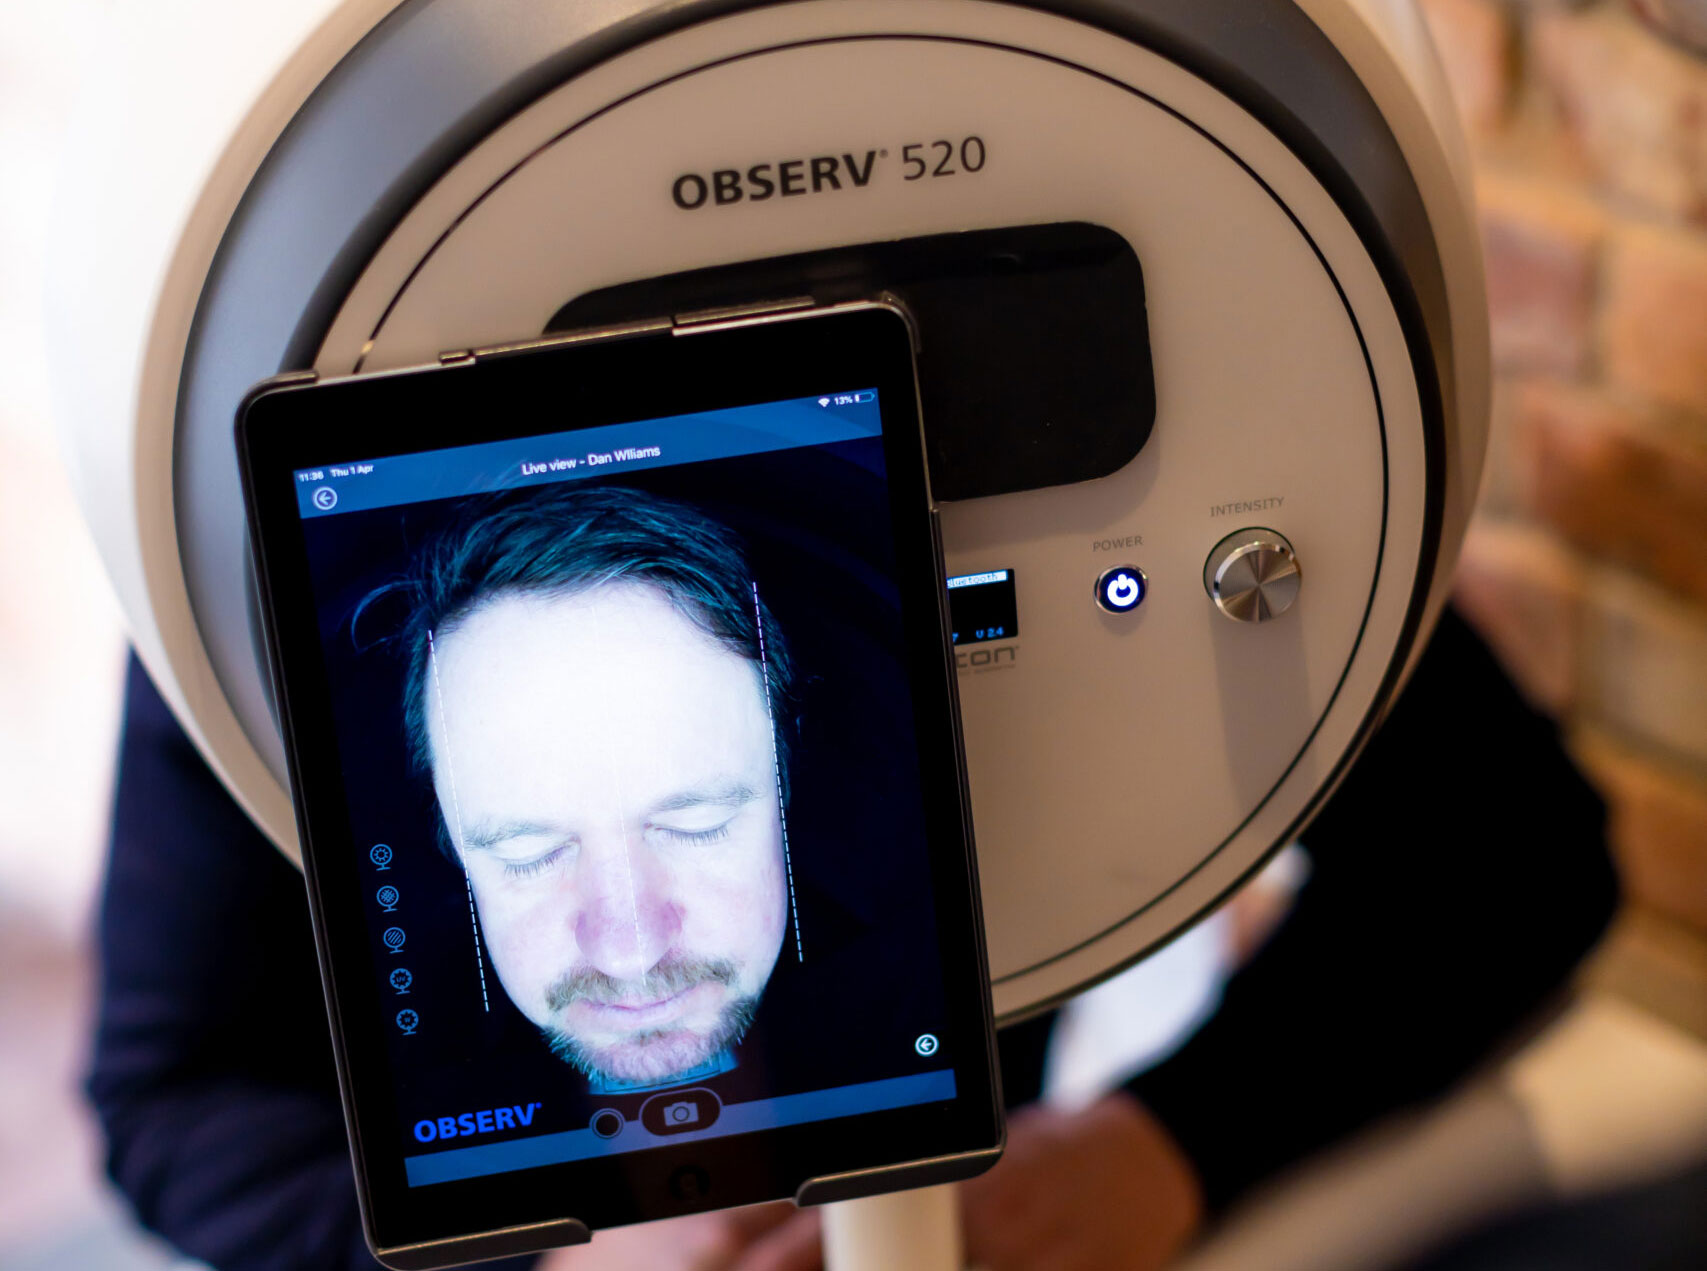 Skin Analysis with Observ 520 at EOS Aesthetics® in Berkshire